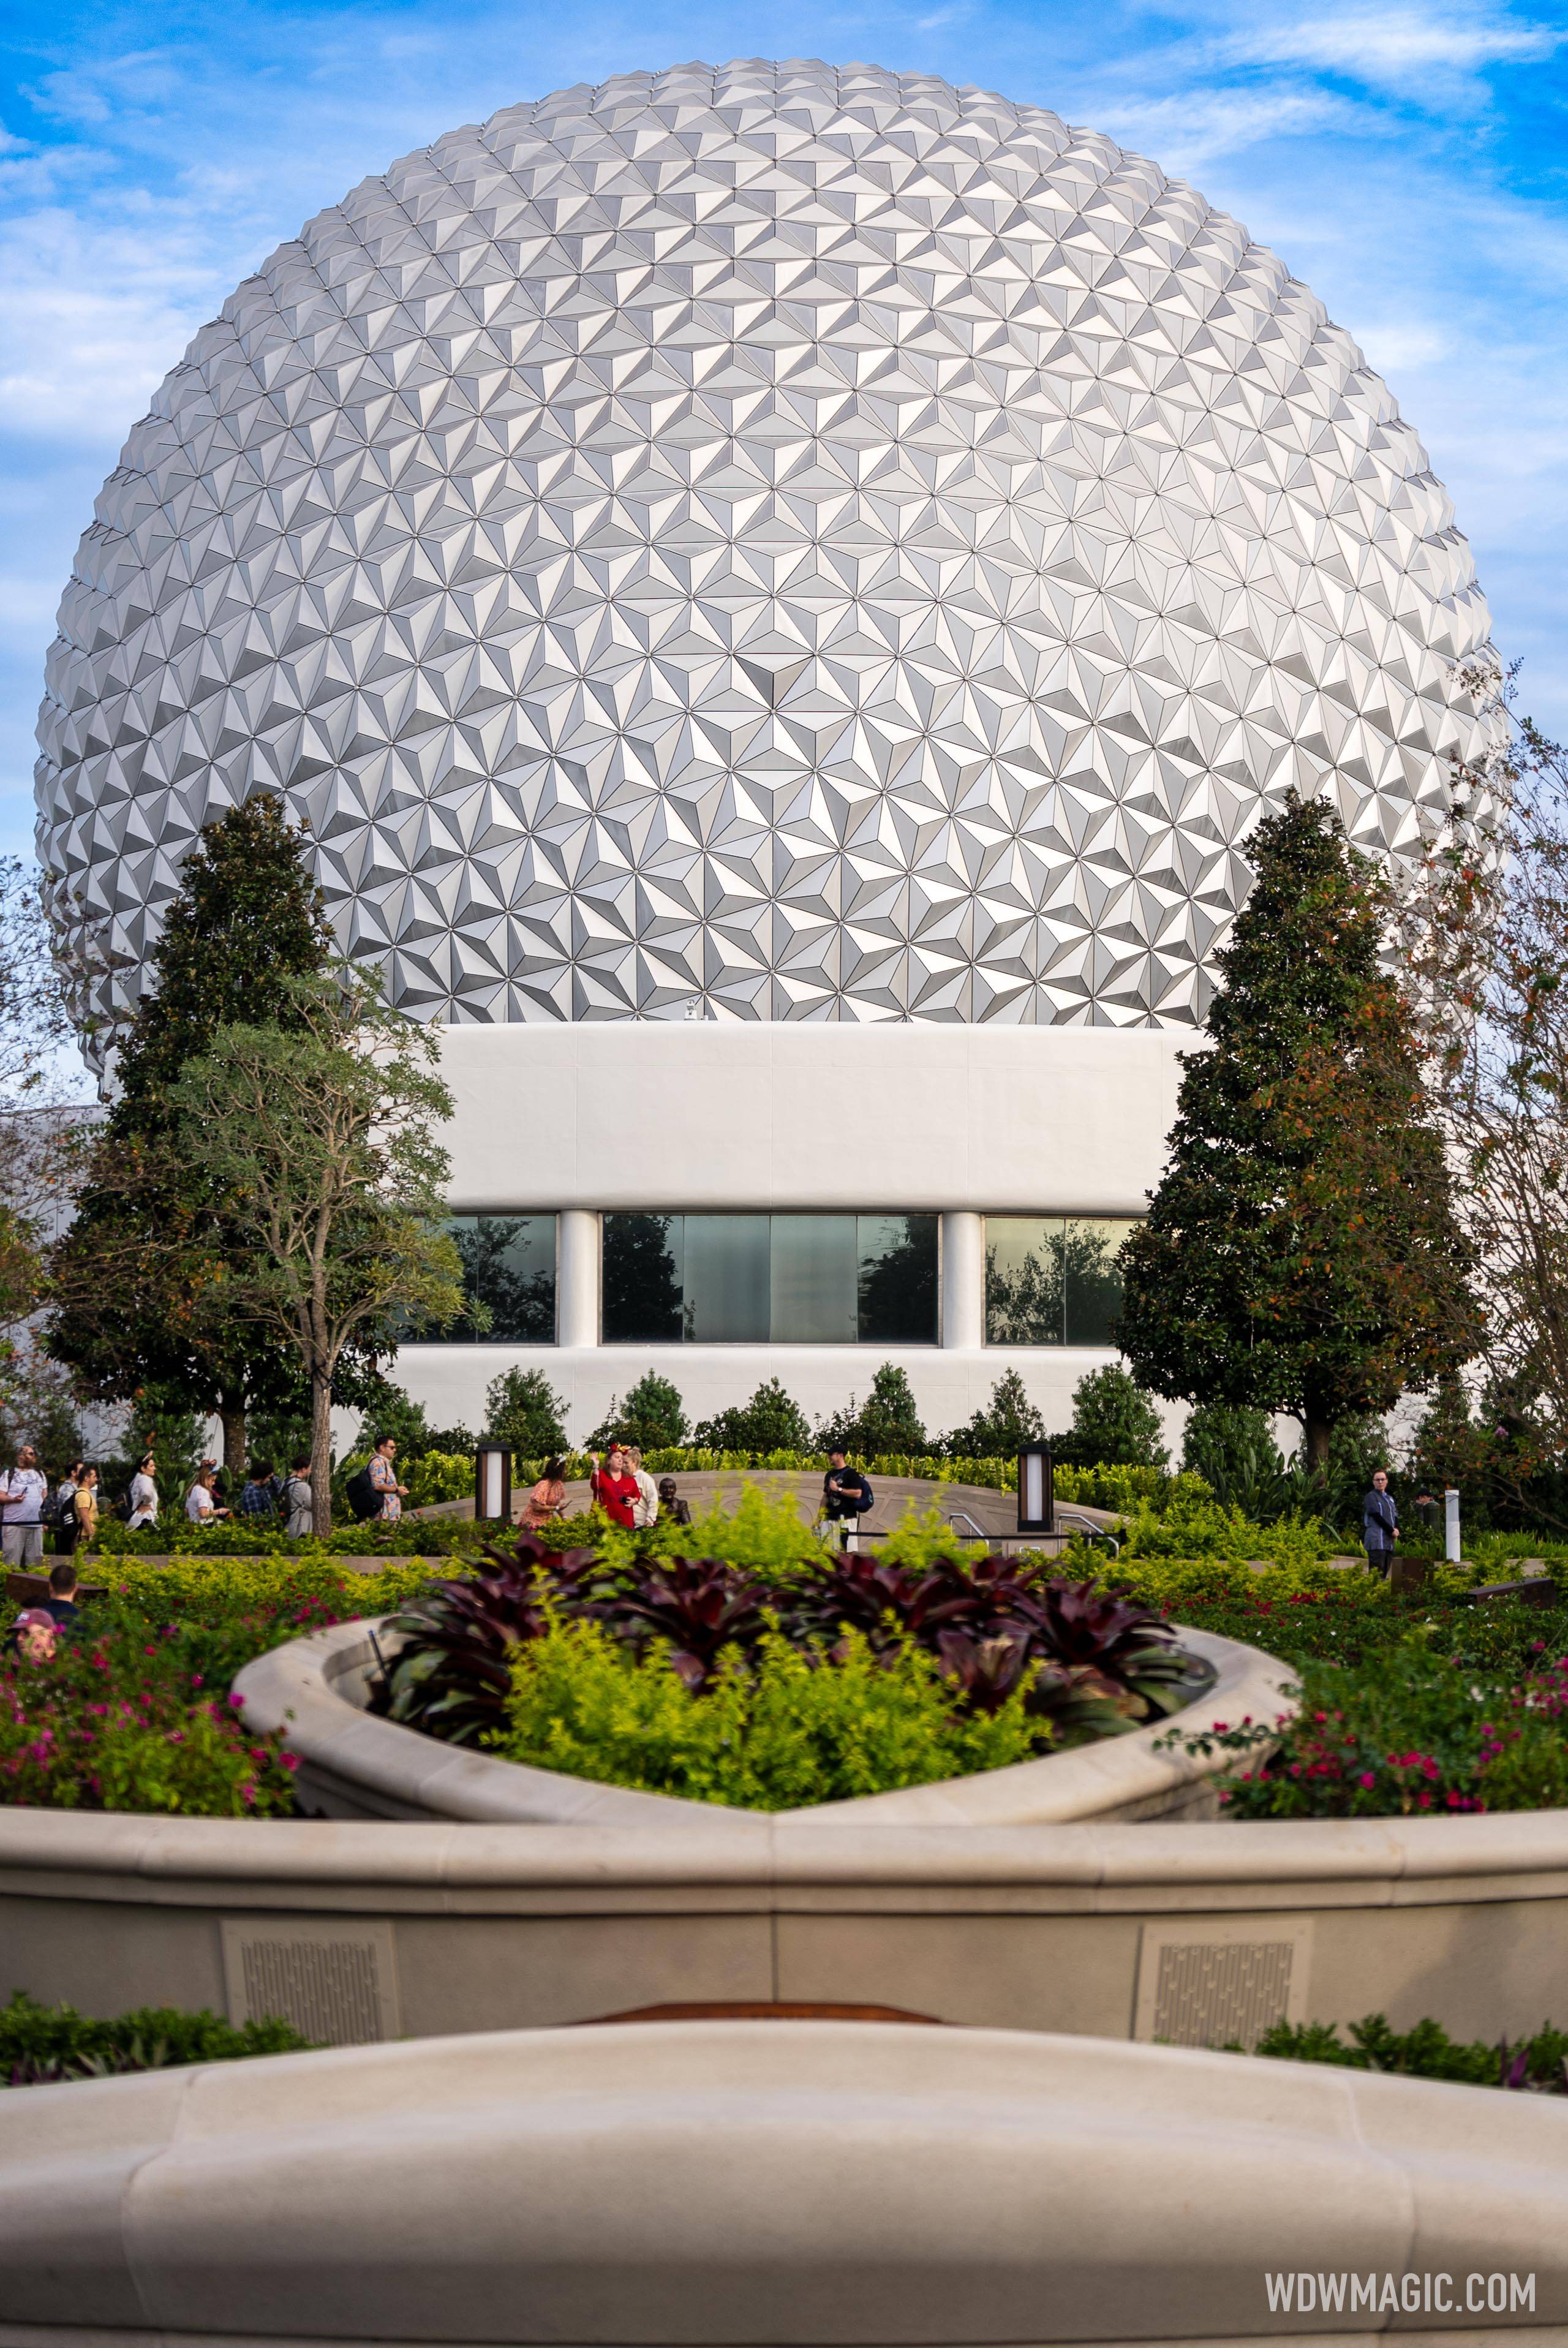 EPCOT will open an hour later than usual this weekend